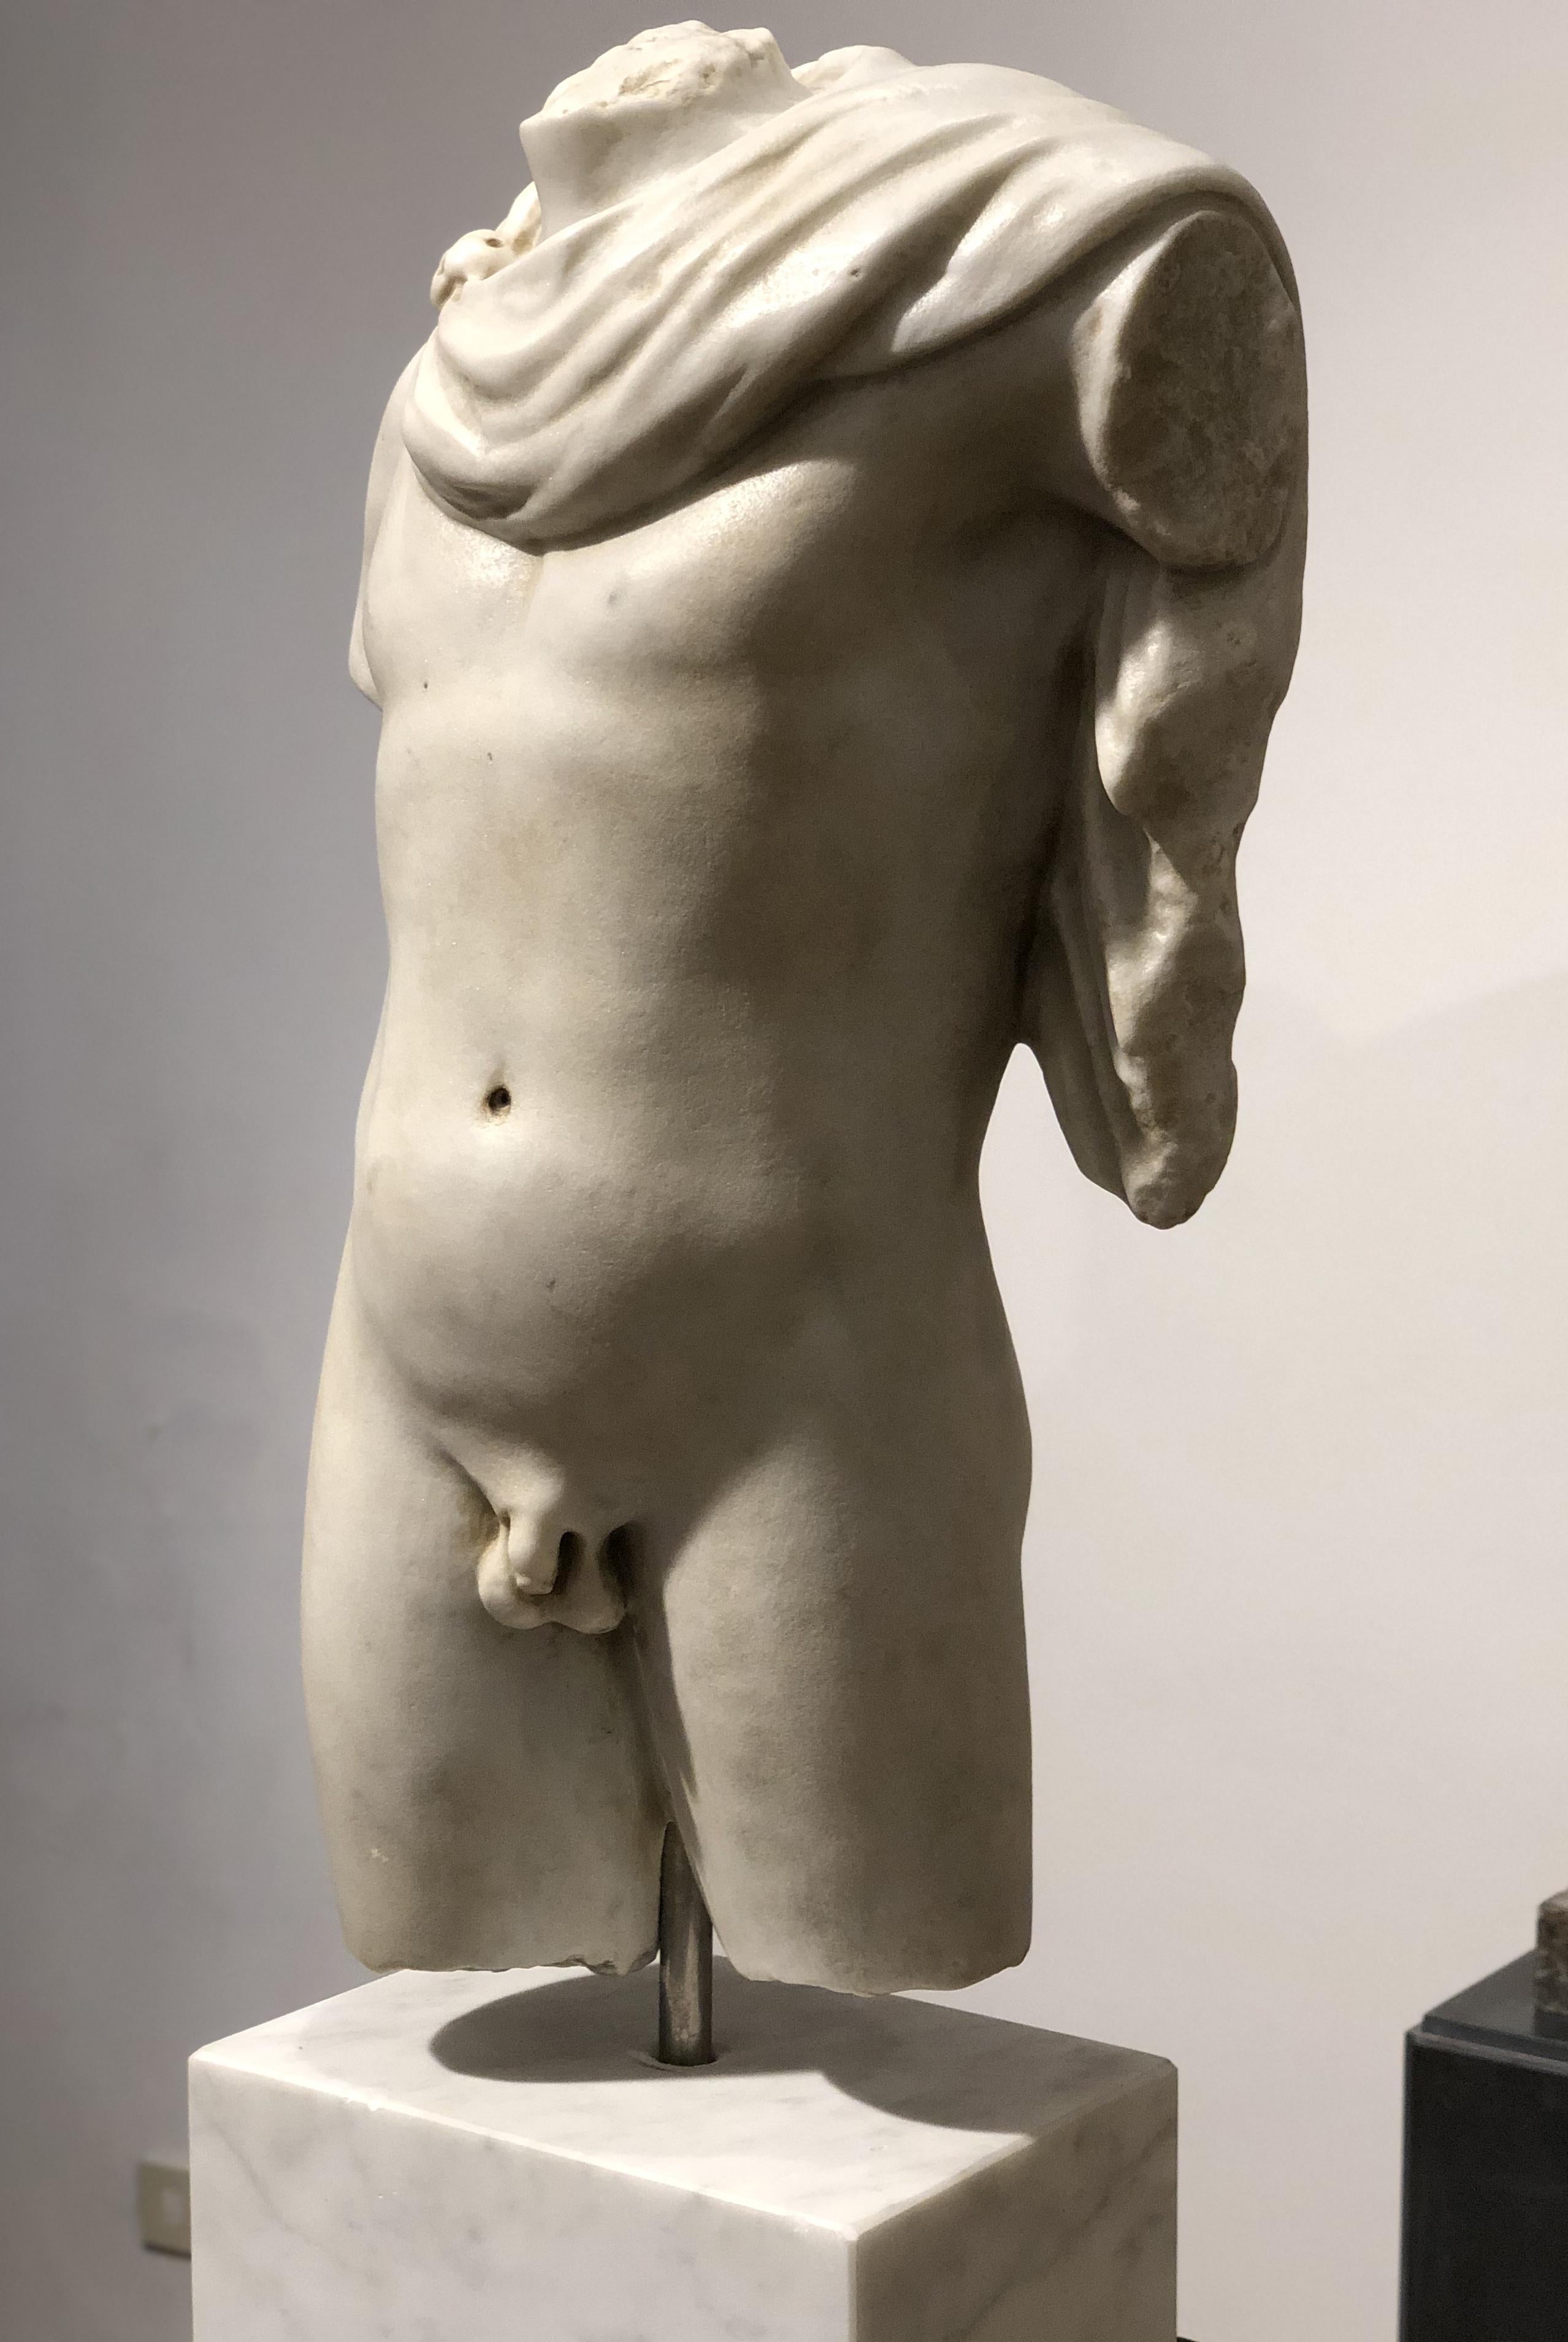 A very nice and elegant white marble sculpture of torso, after the ancient original Greek. Apollo (Attic, Ionic, and is one of the most important and complex of the Olympian deities in classical Greek and Roman religion and Greek and Roman